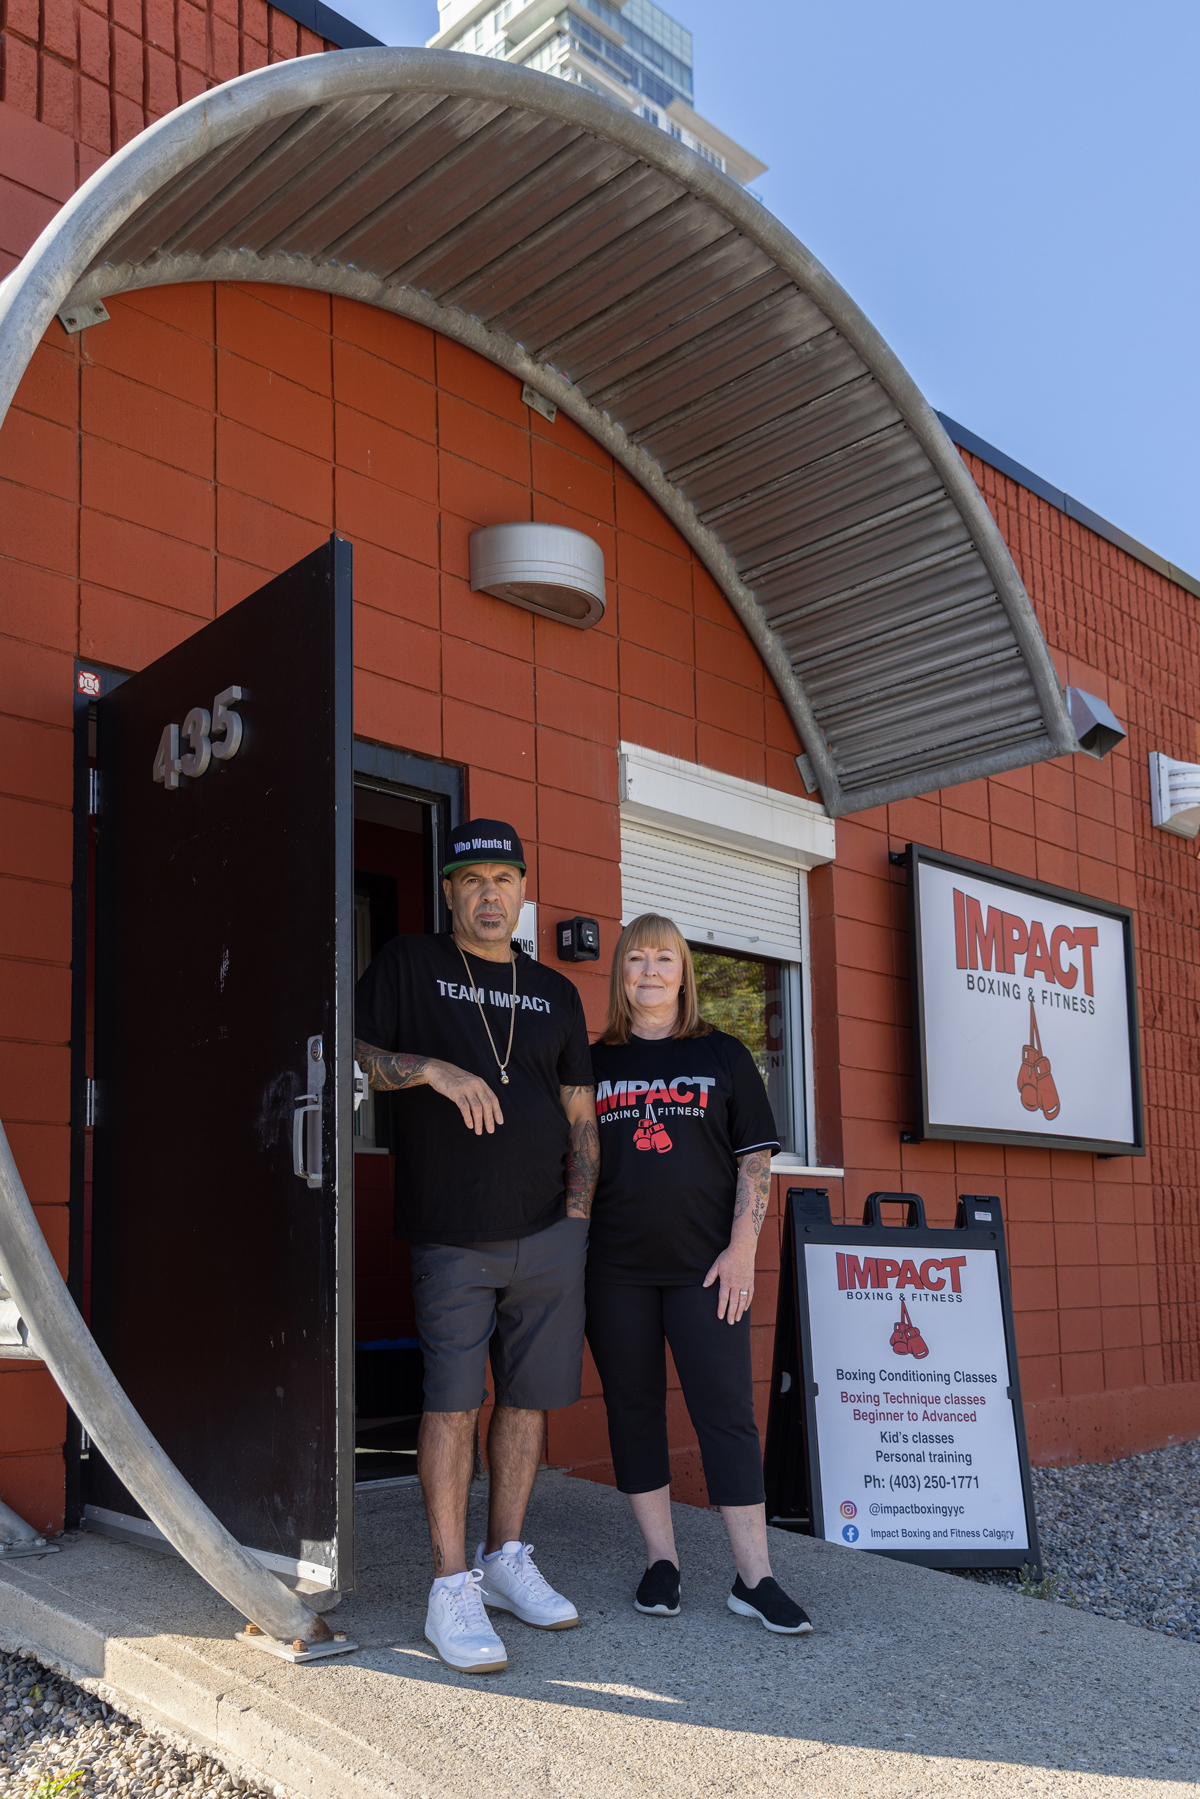 Employees at the entrance of Impact Boxing and Fitness.